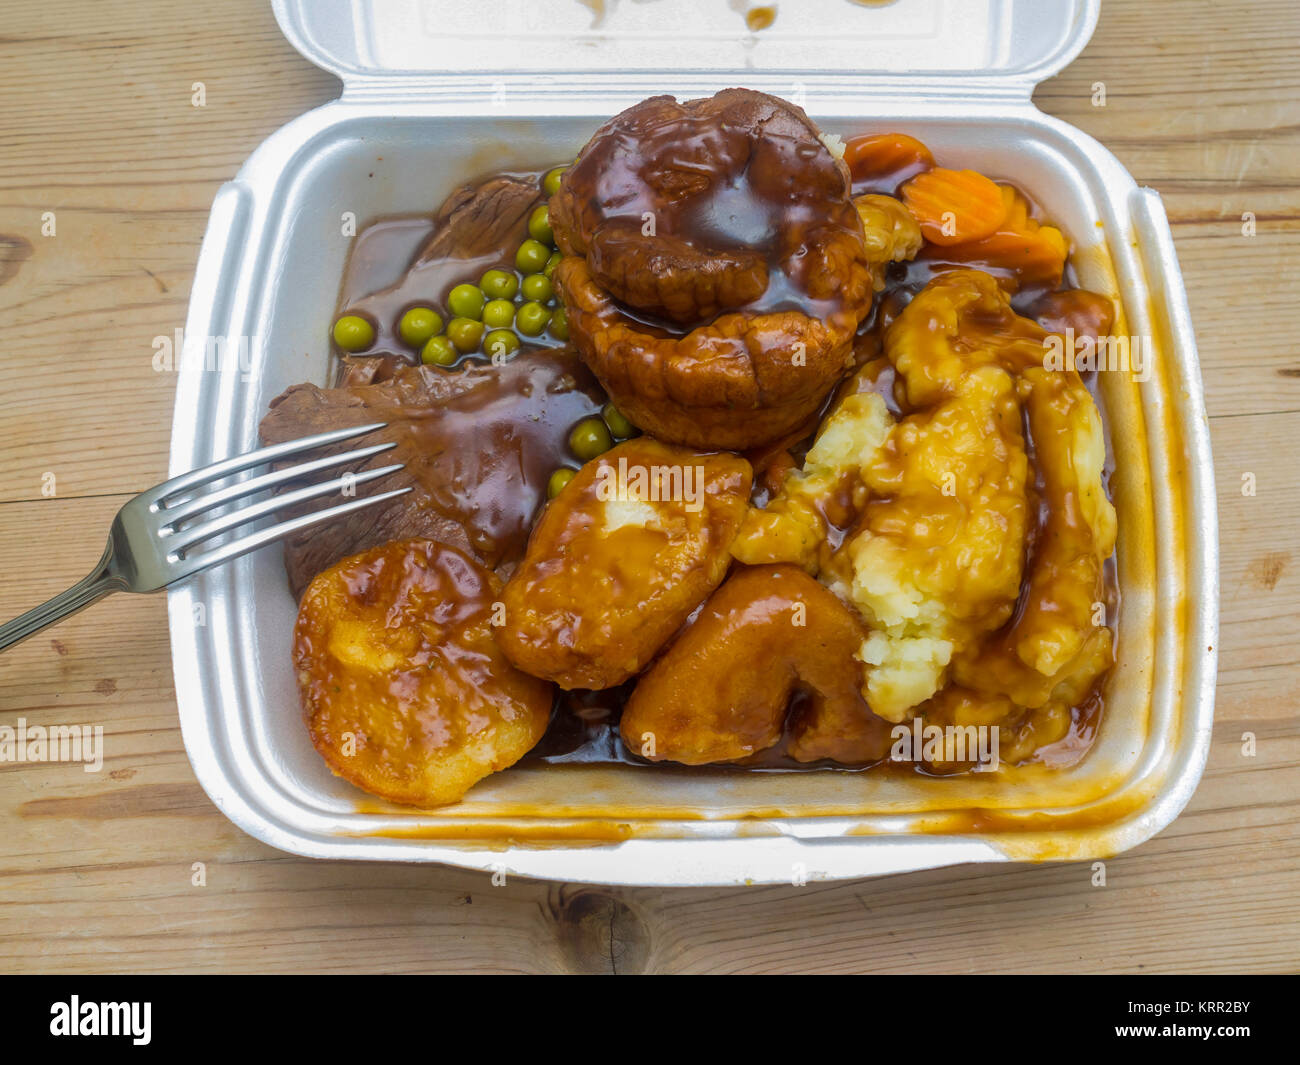 Take away Sunday Lunch from a craft butcher's shop with Roast Beef, Yorkshire Pudding, carrots, peas mashed and roast potatoes and gravy Stock Photo